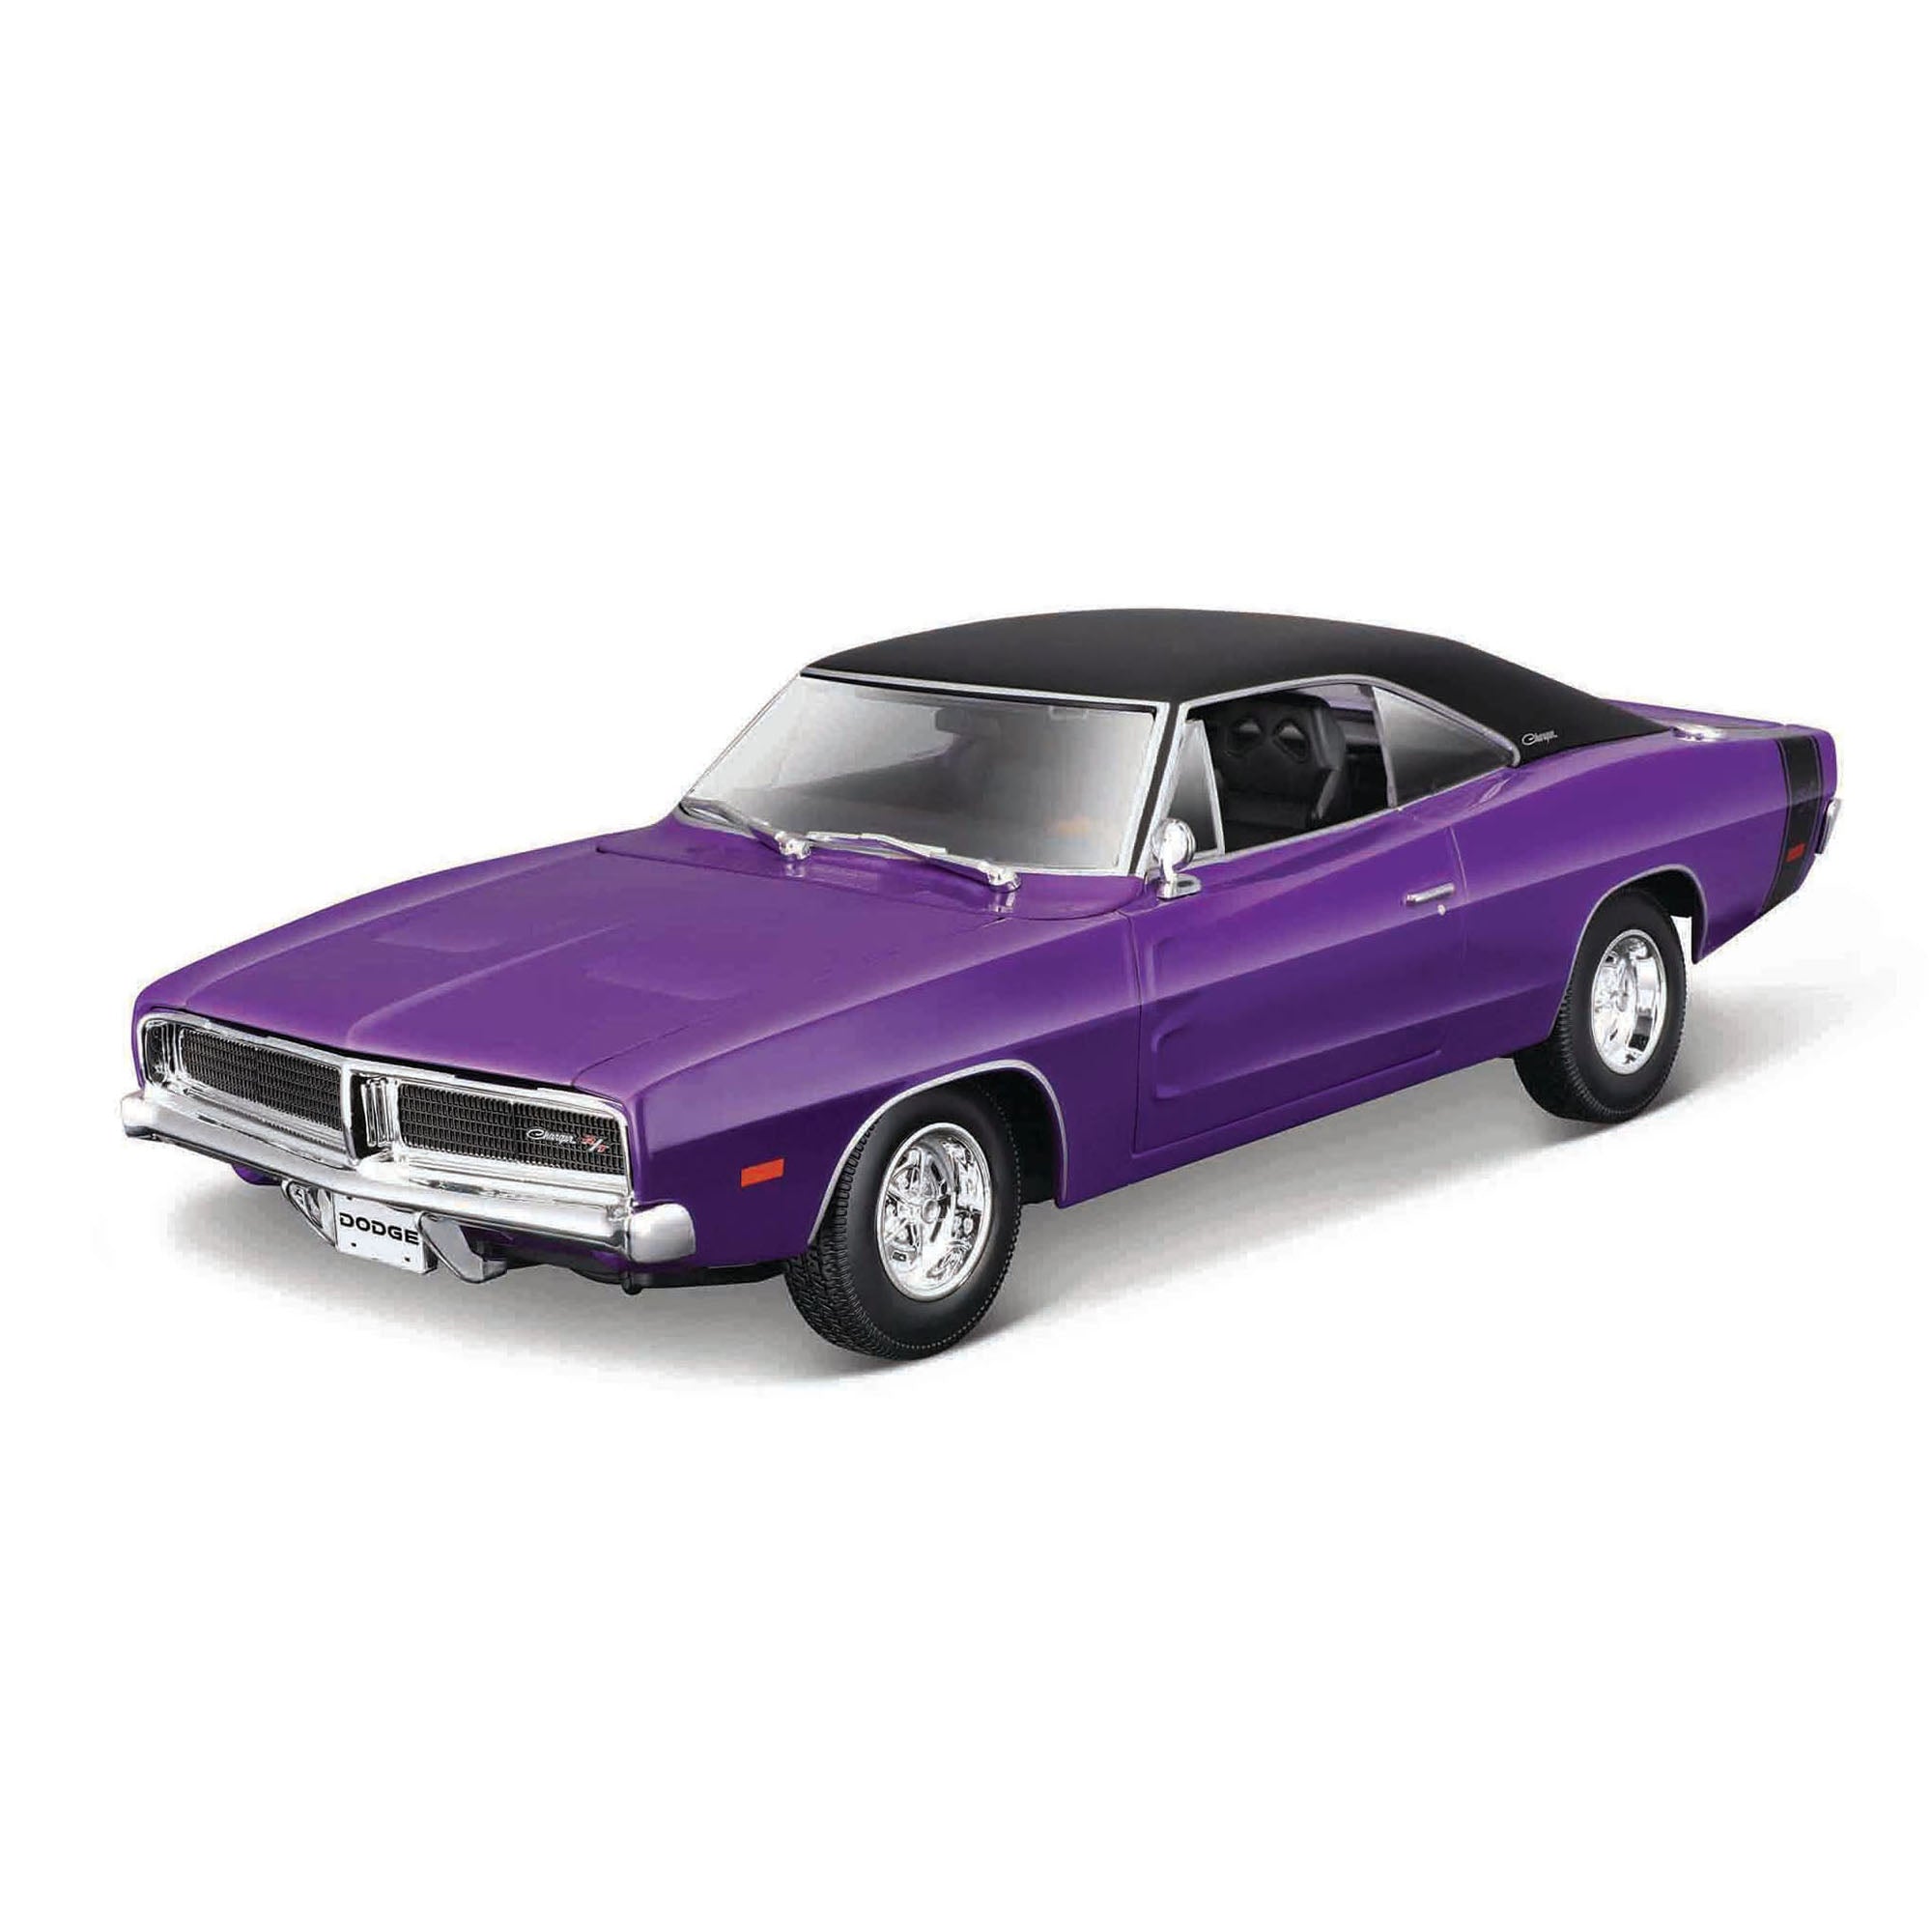 Maisto 1:18 1969 Dodge Charger R/T - Purple with Black Roof